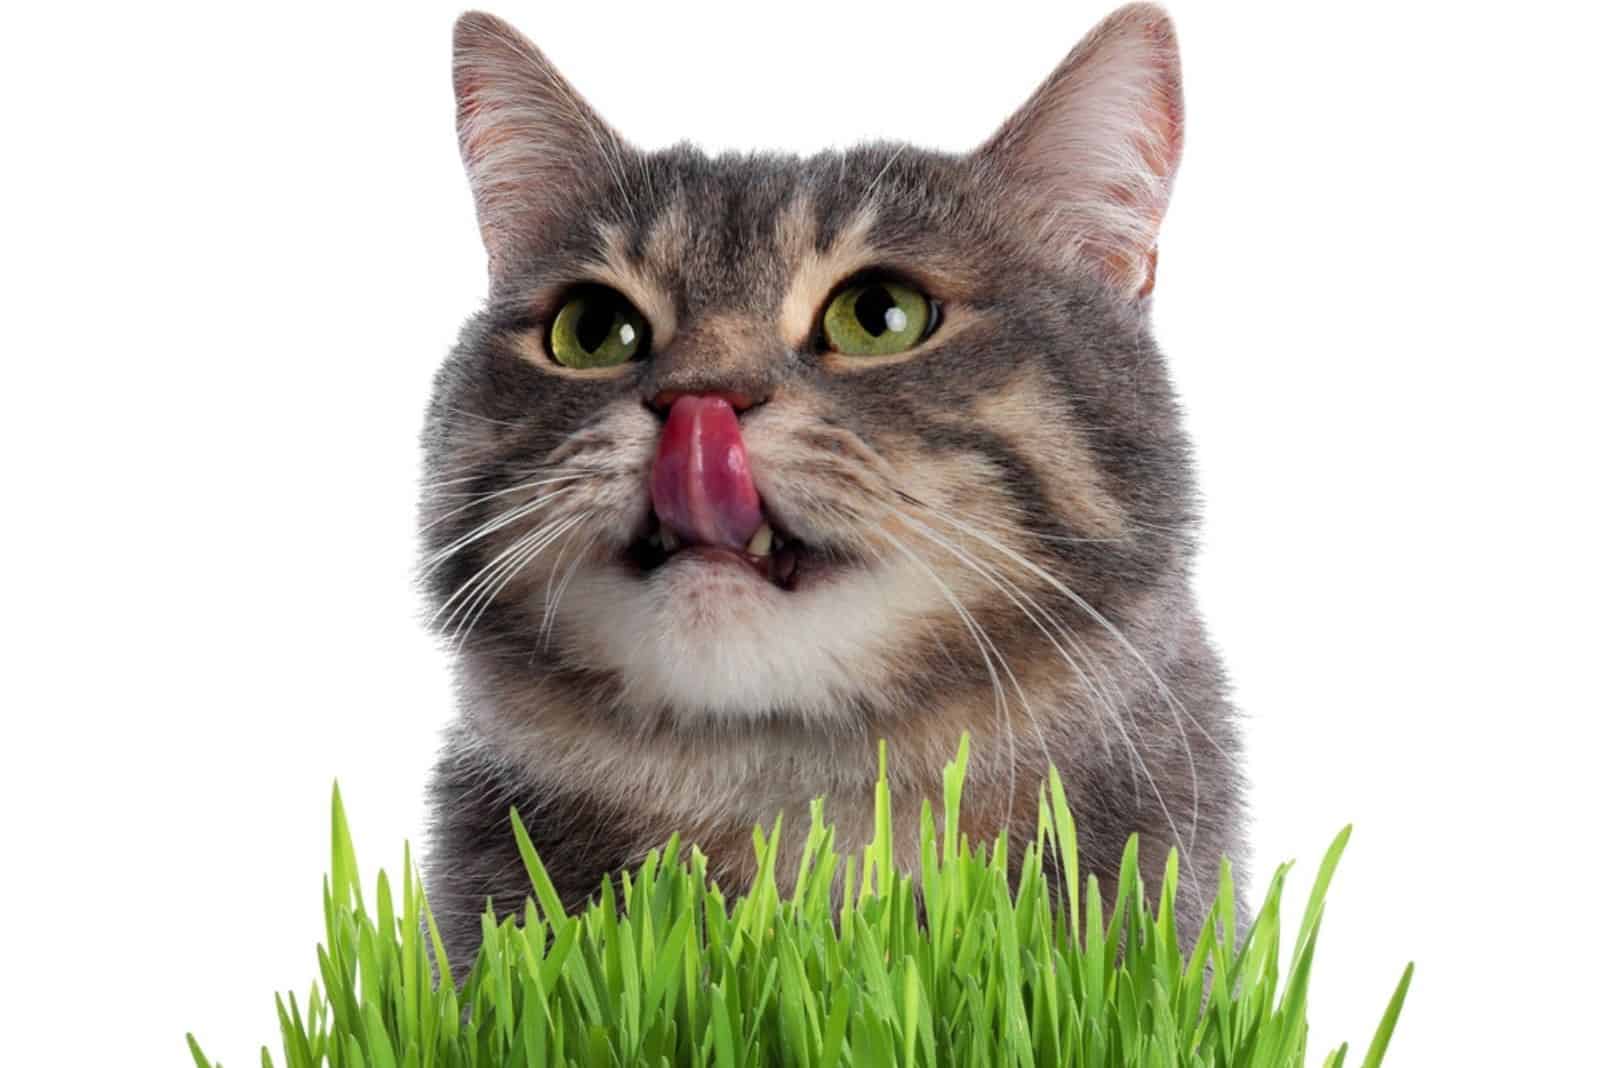 Adorable cat and fresh green grass